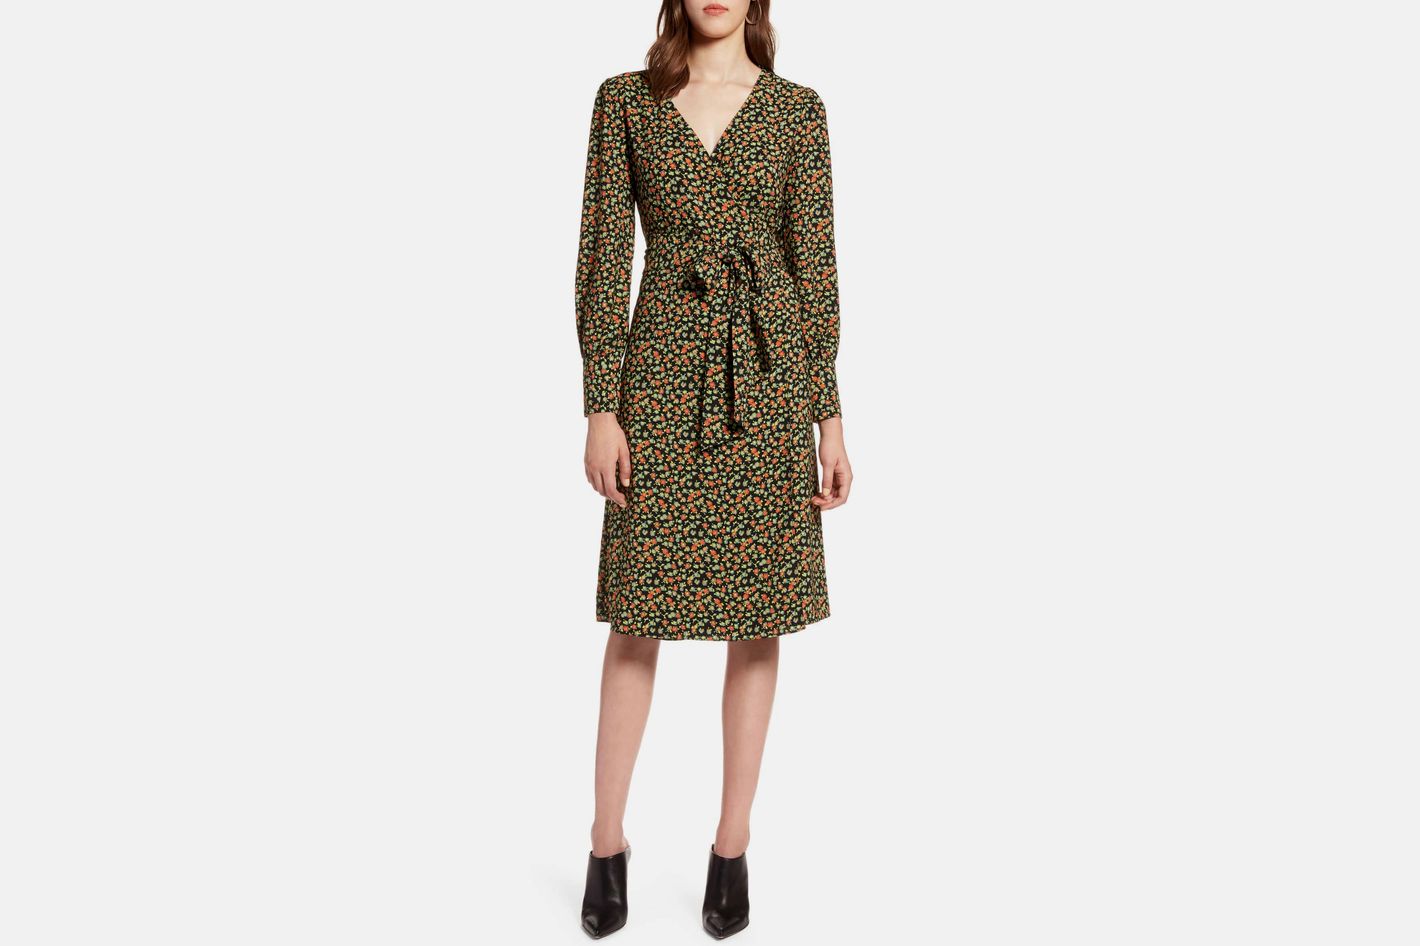 25 Wrap Dresses You Can Wear to Work